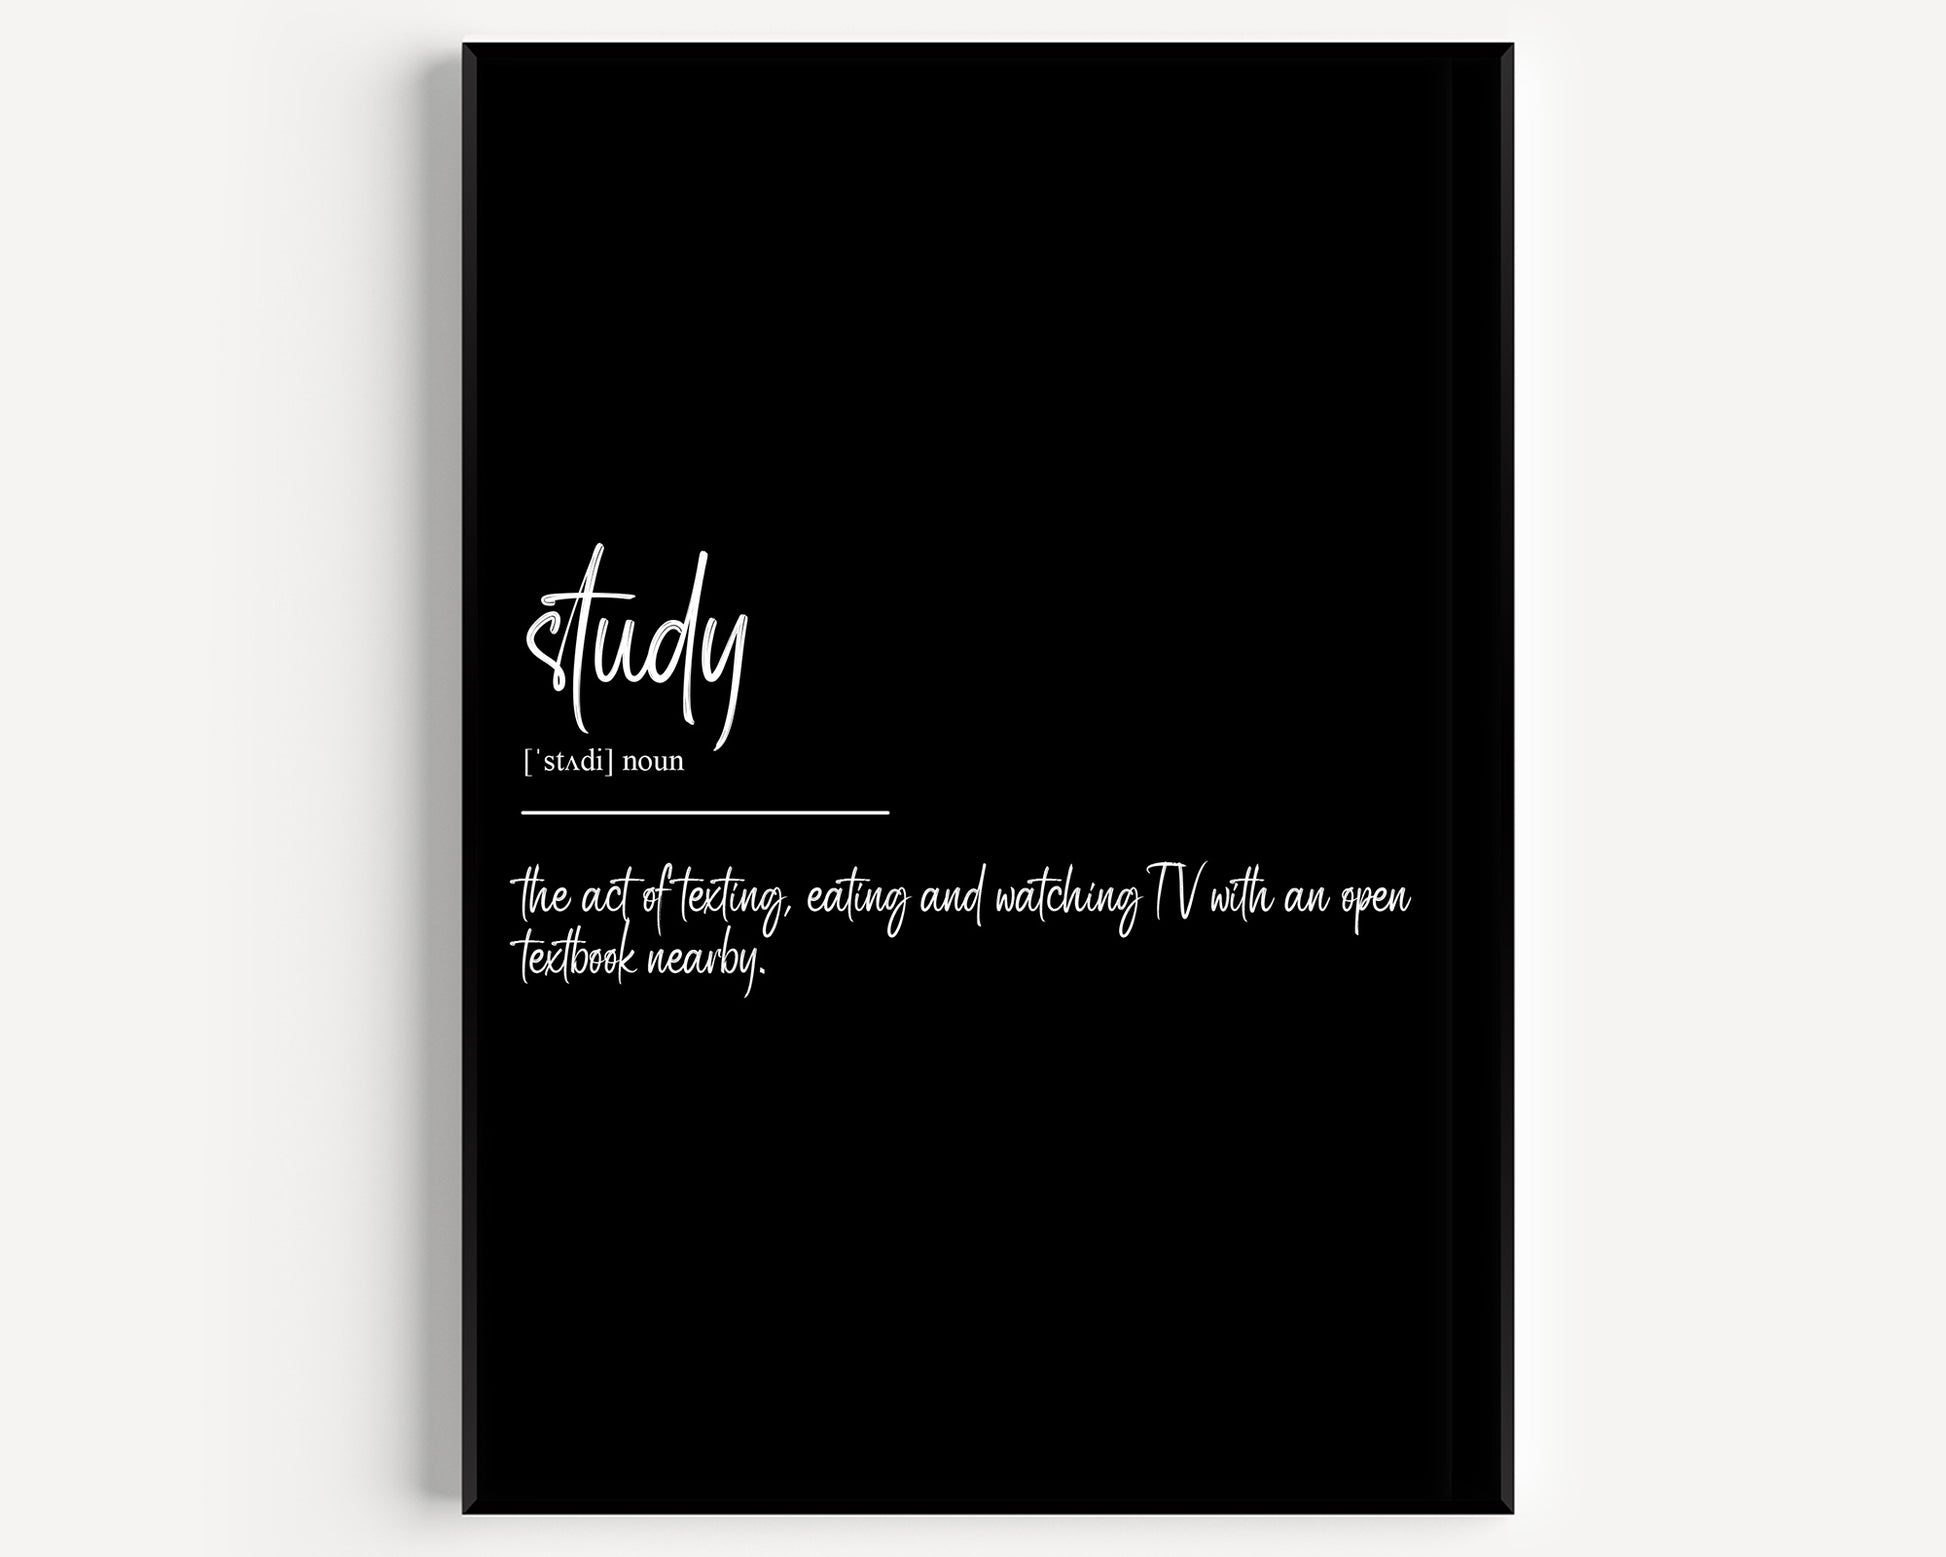 Study Definition Print - Magic Posters